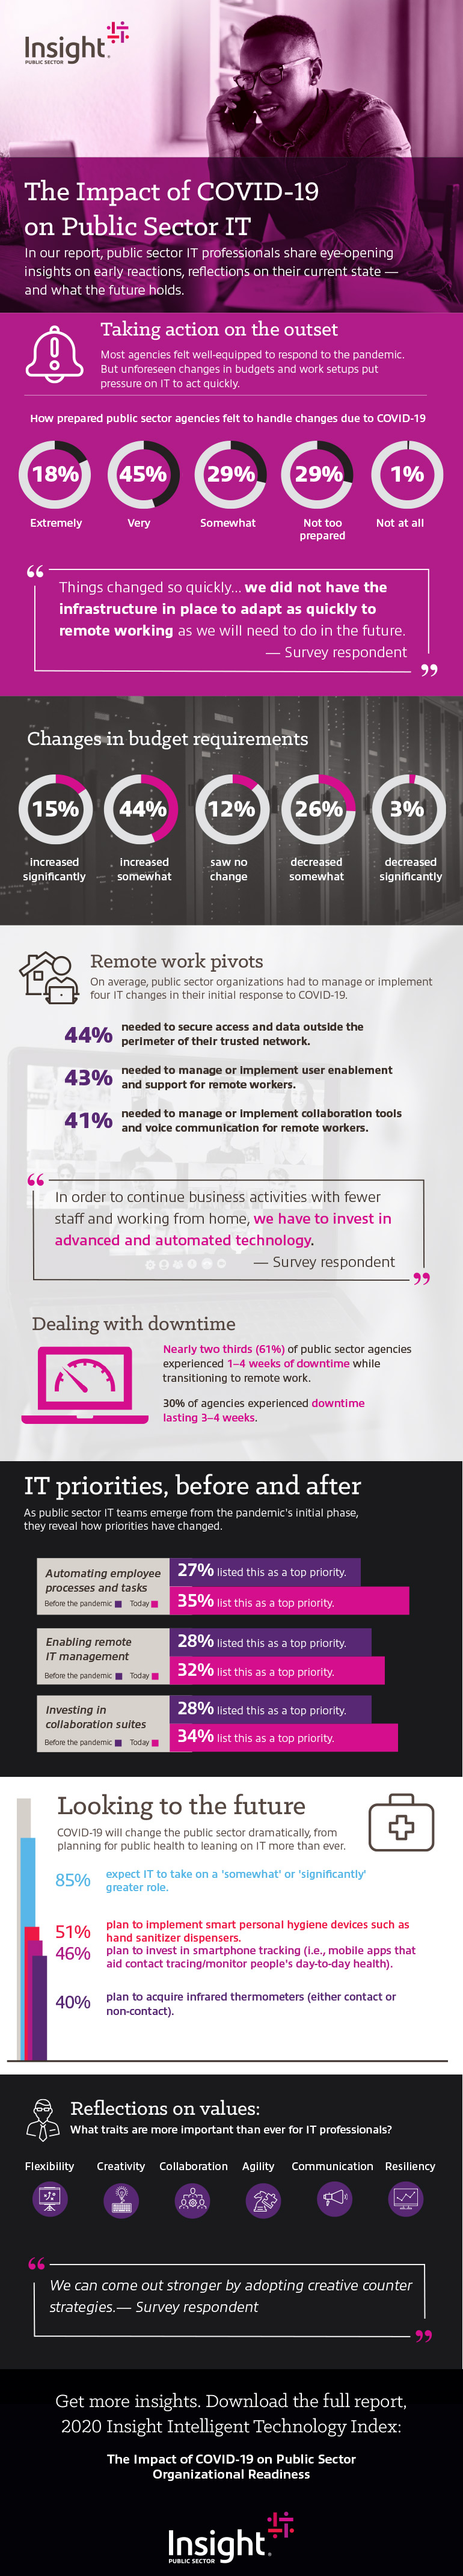 The Impact of COVID-19 on Public Sector IT infographic